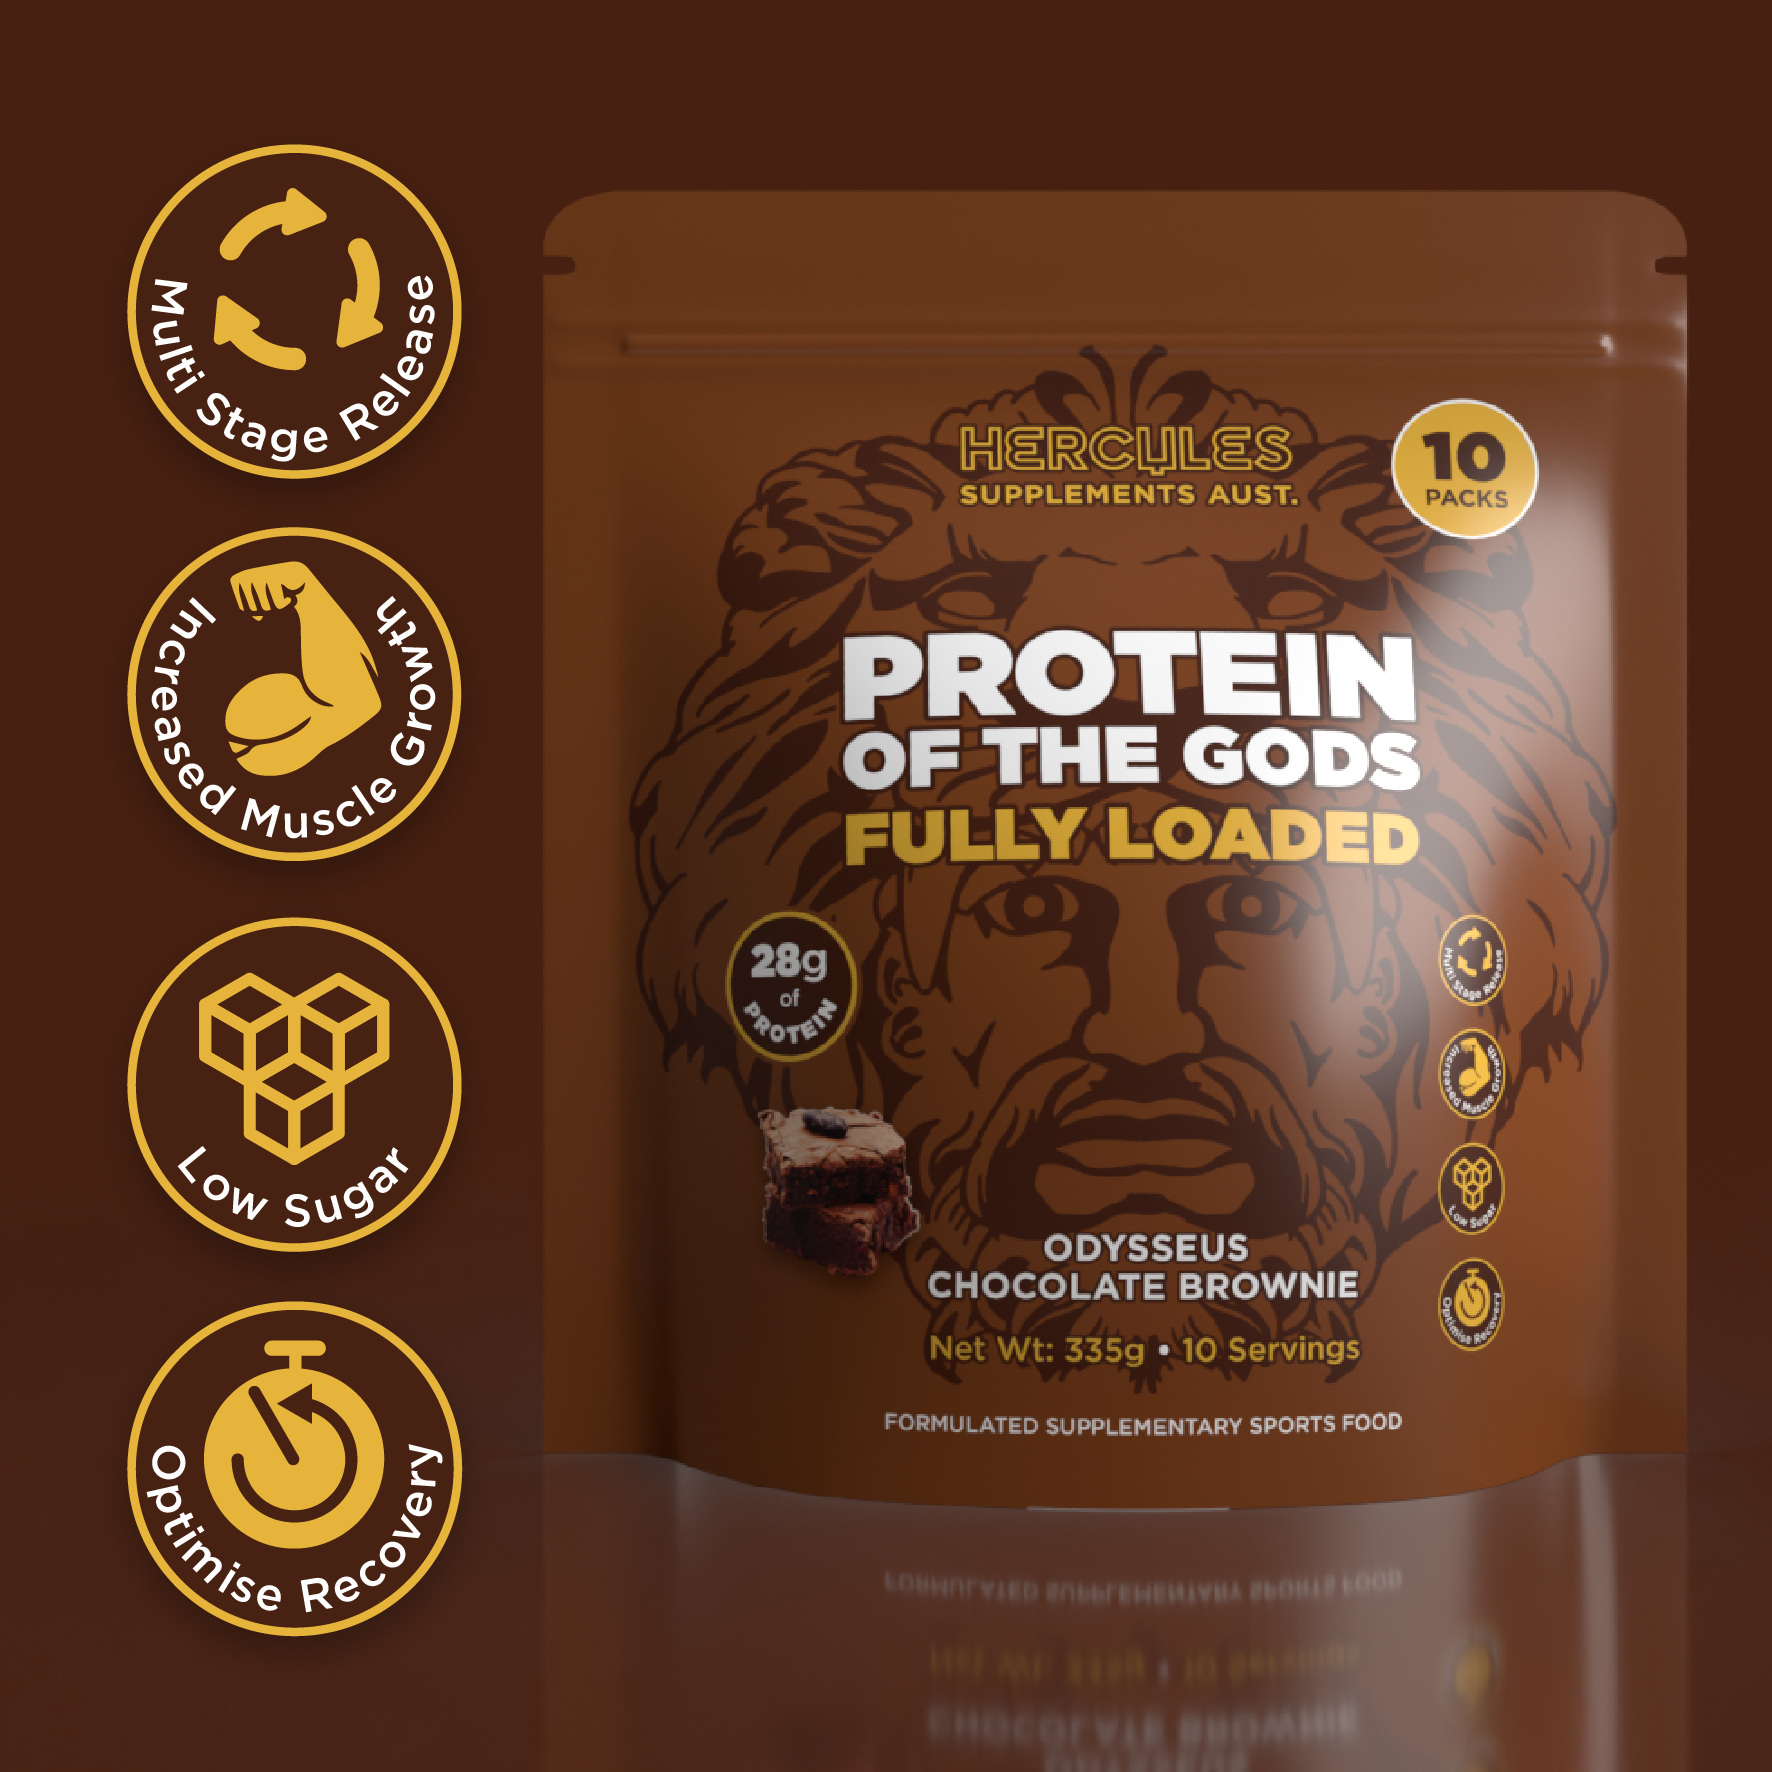 Protein of the Gods - Fully Loaded Chocolate Brownie loaded protein -10 Pack